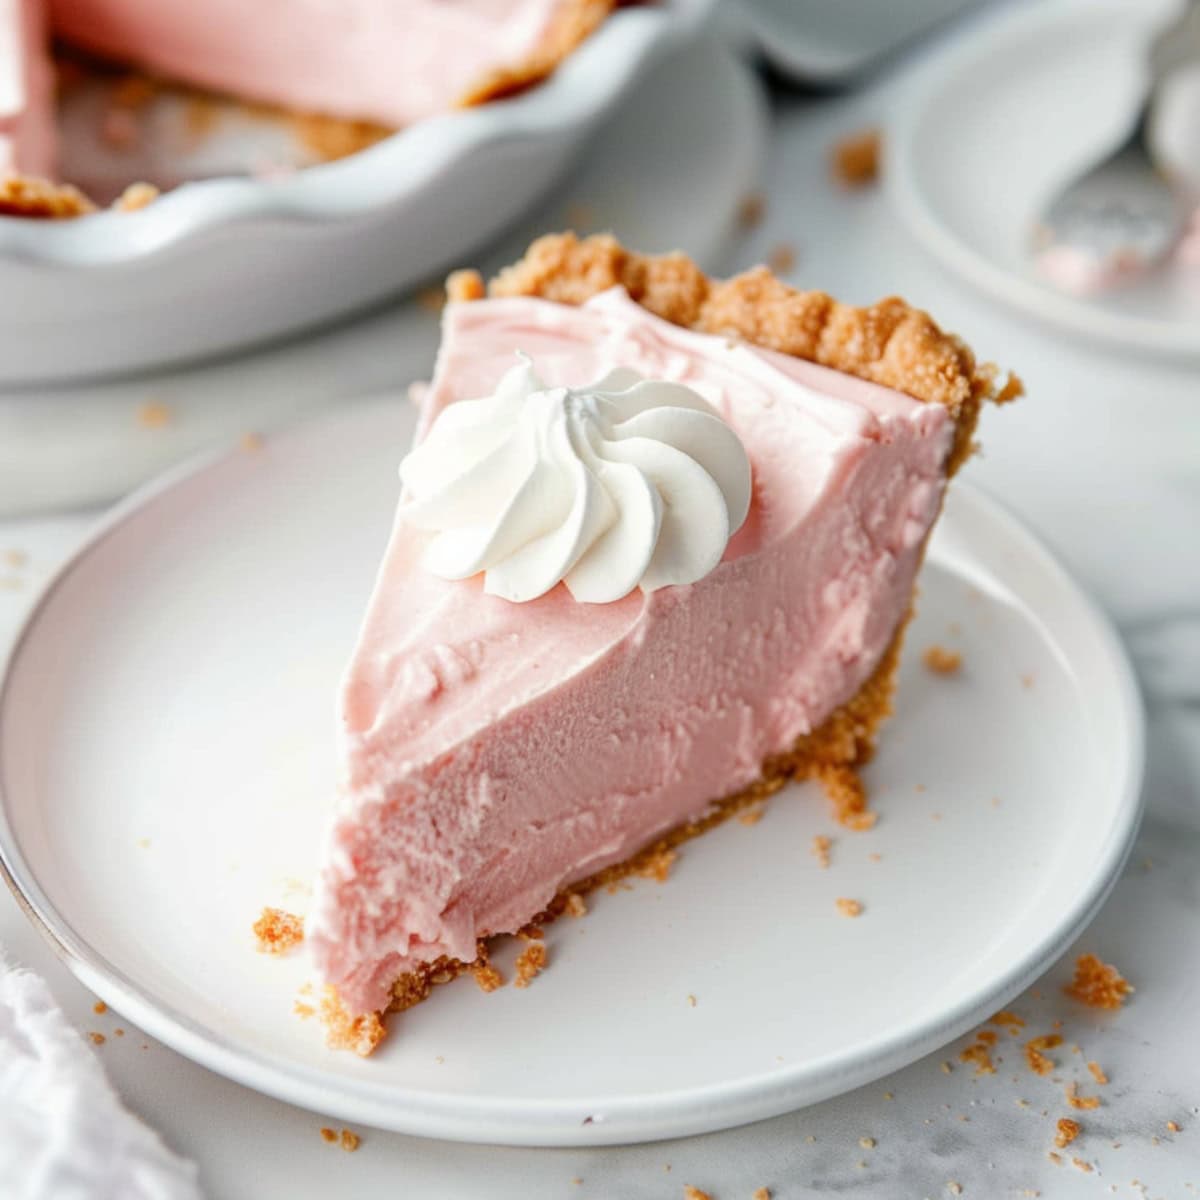 A slice of pink lemonade pie with whipped cream on top, served in a plate.